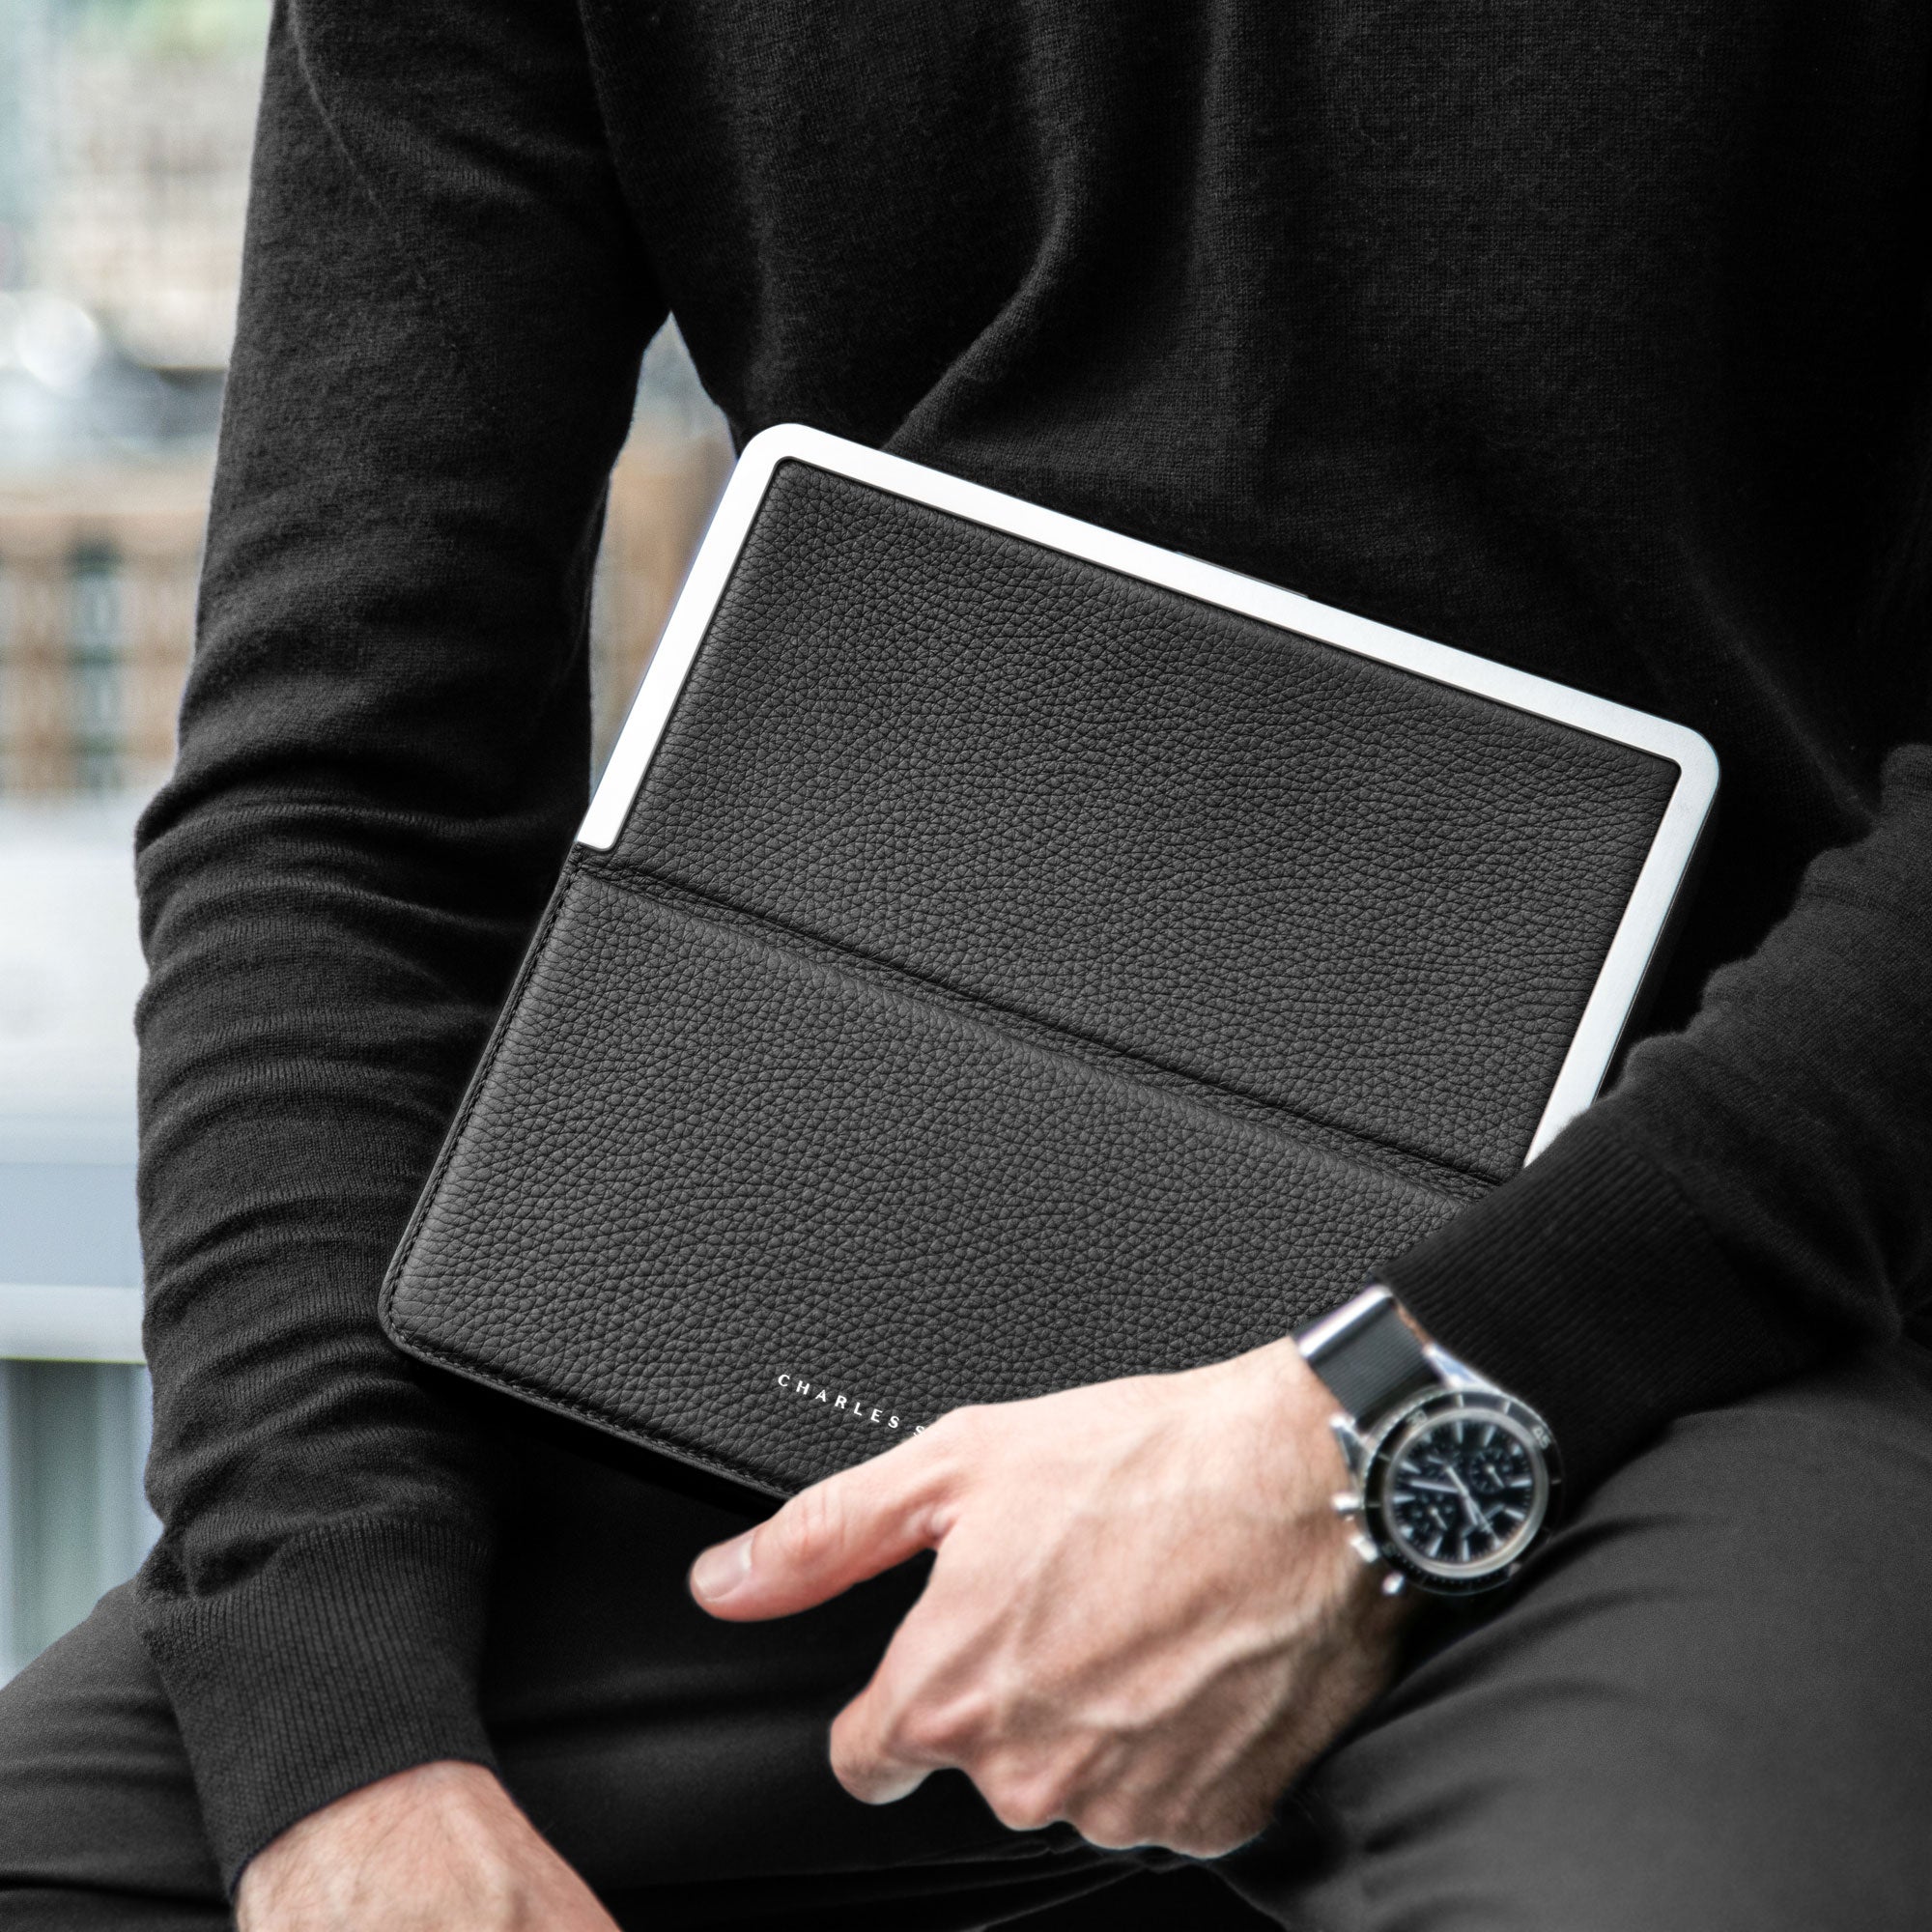 Modern business man holding his practical travel companion, the Fraser Travel wallet by Charles Simon.